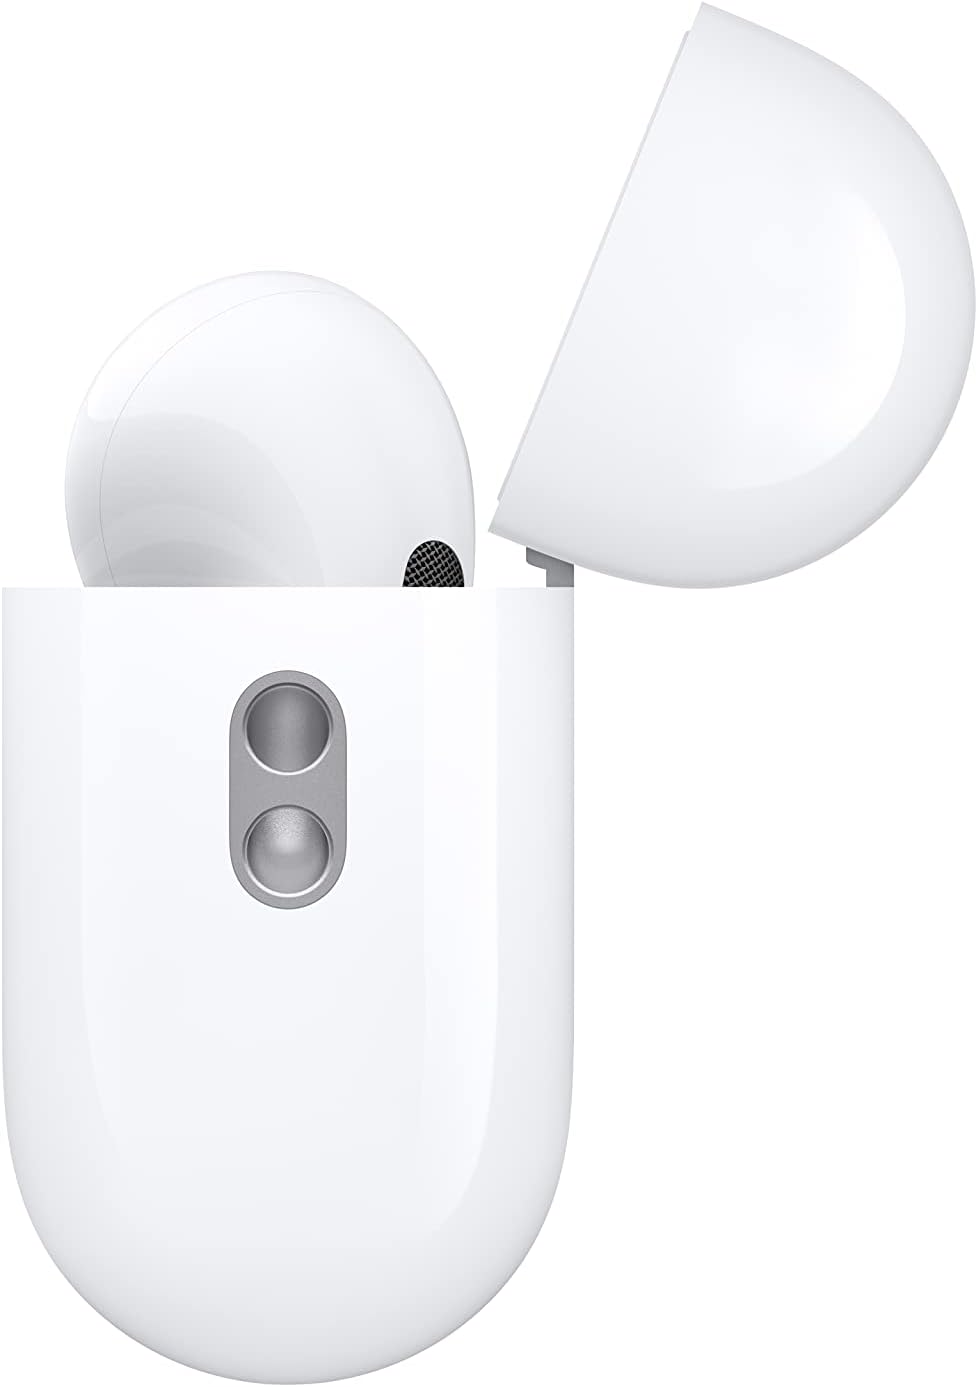 Apple AirPods Pro - Up to 2x more noise cancellation for focused listening. 0195949052620